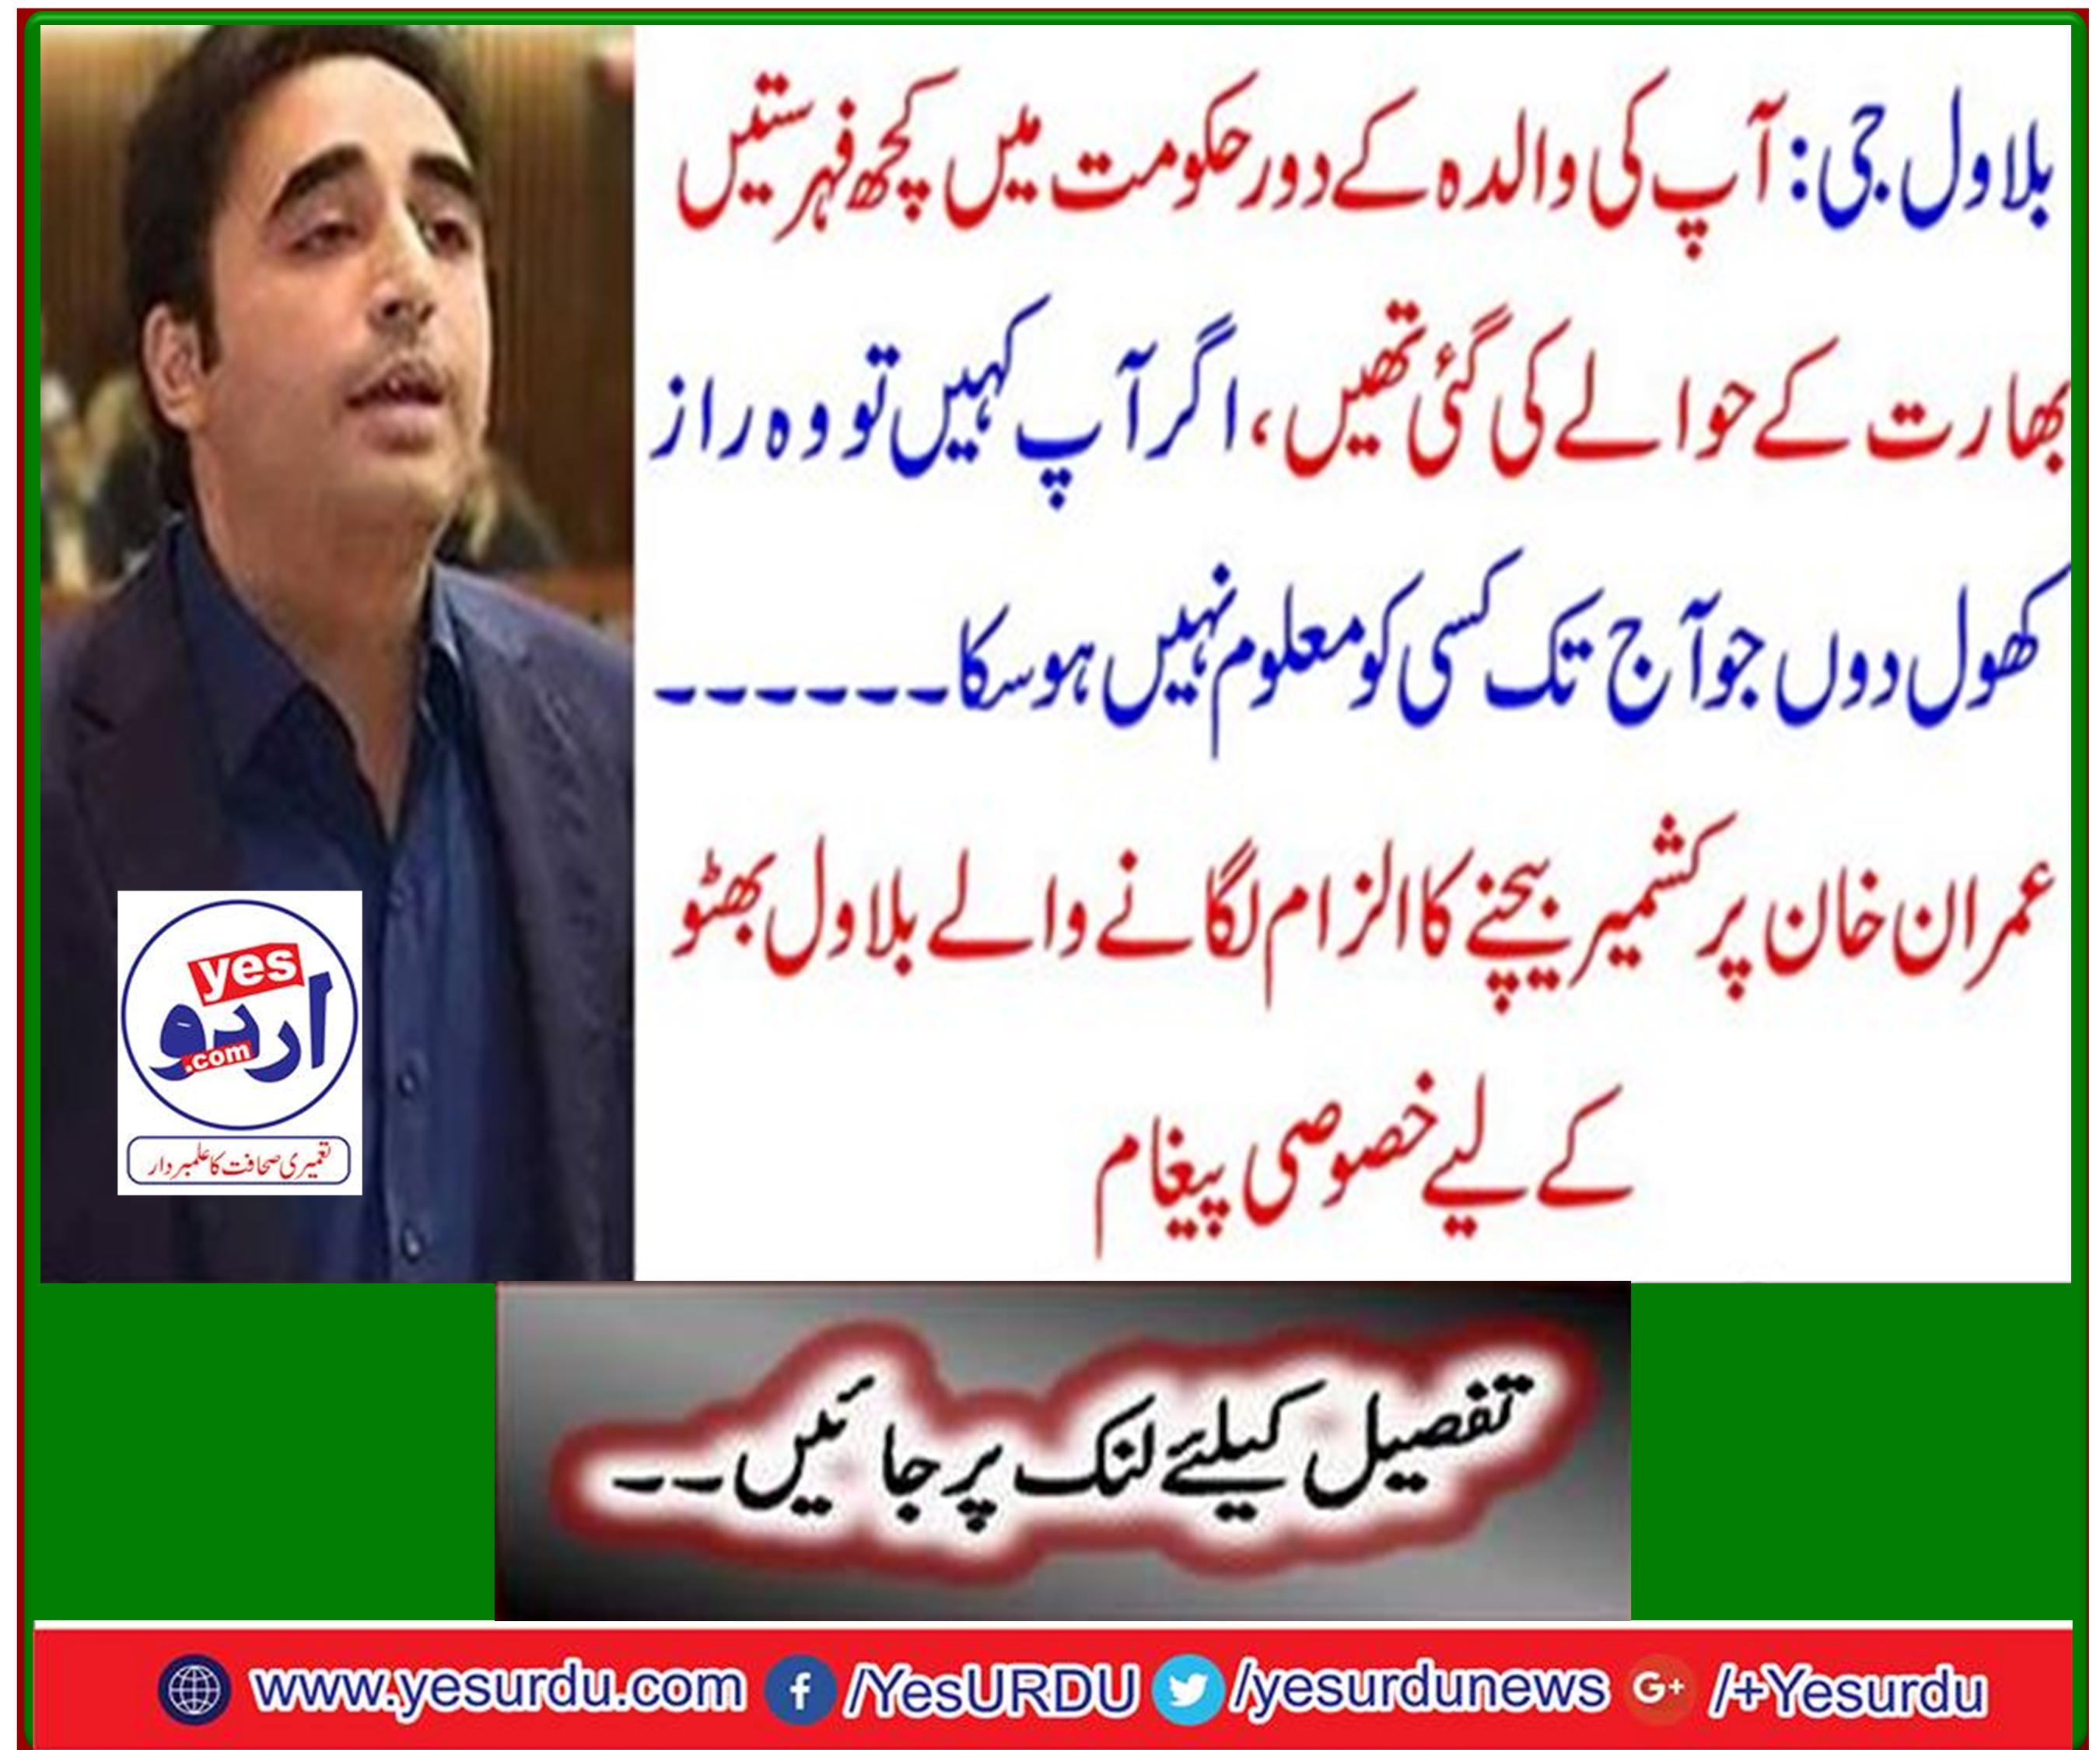 Special message for Bilawal Bhutto accused of selling Kashmir to Imran Khan